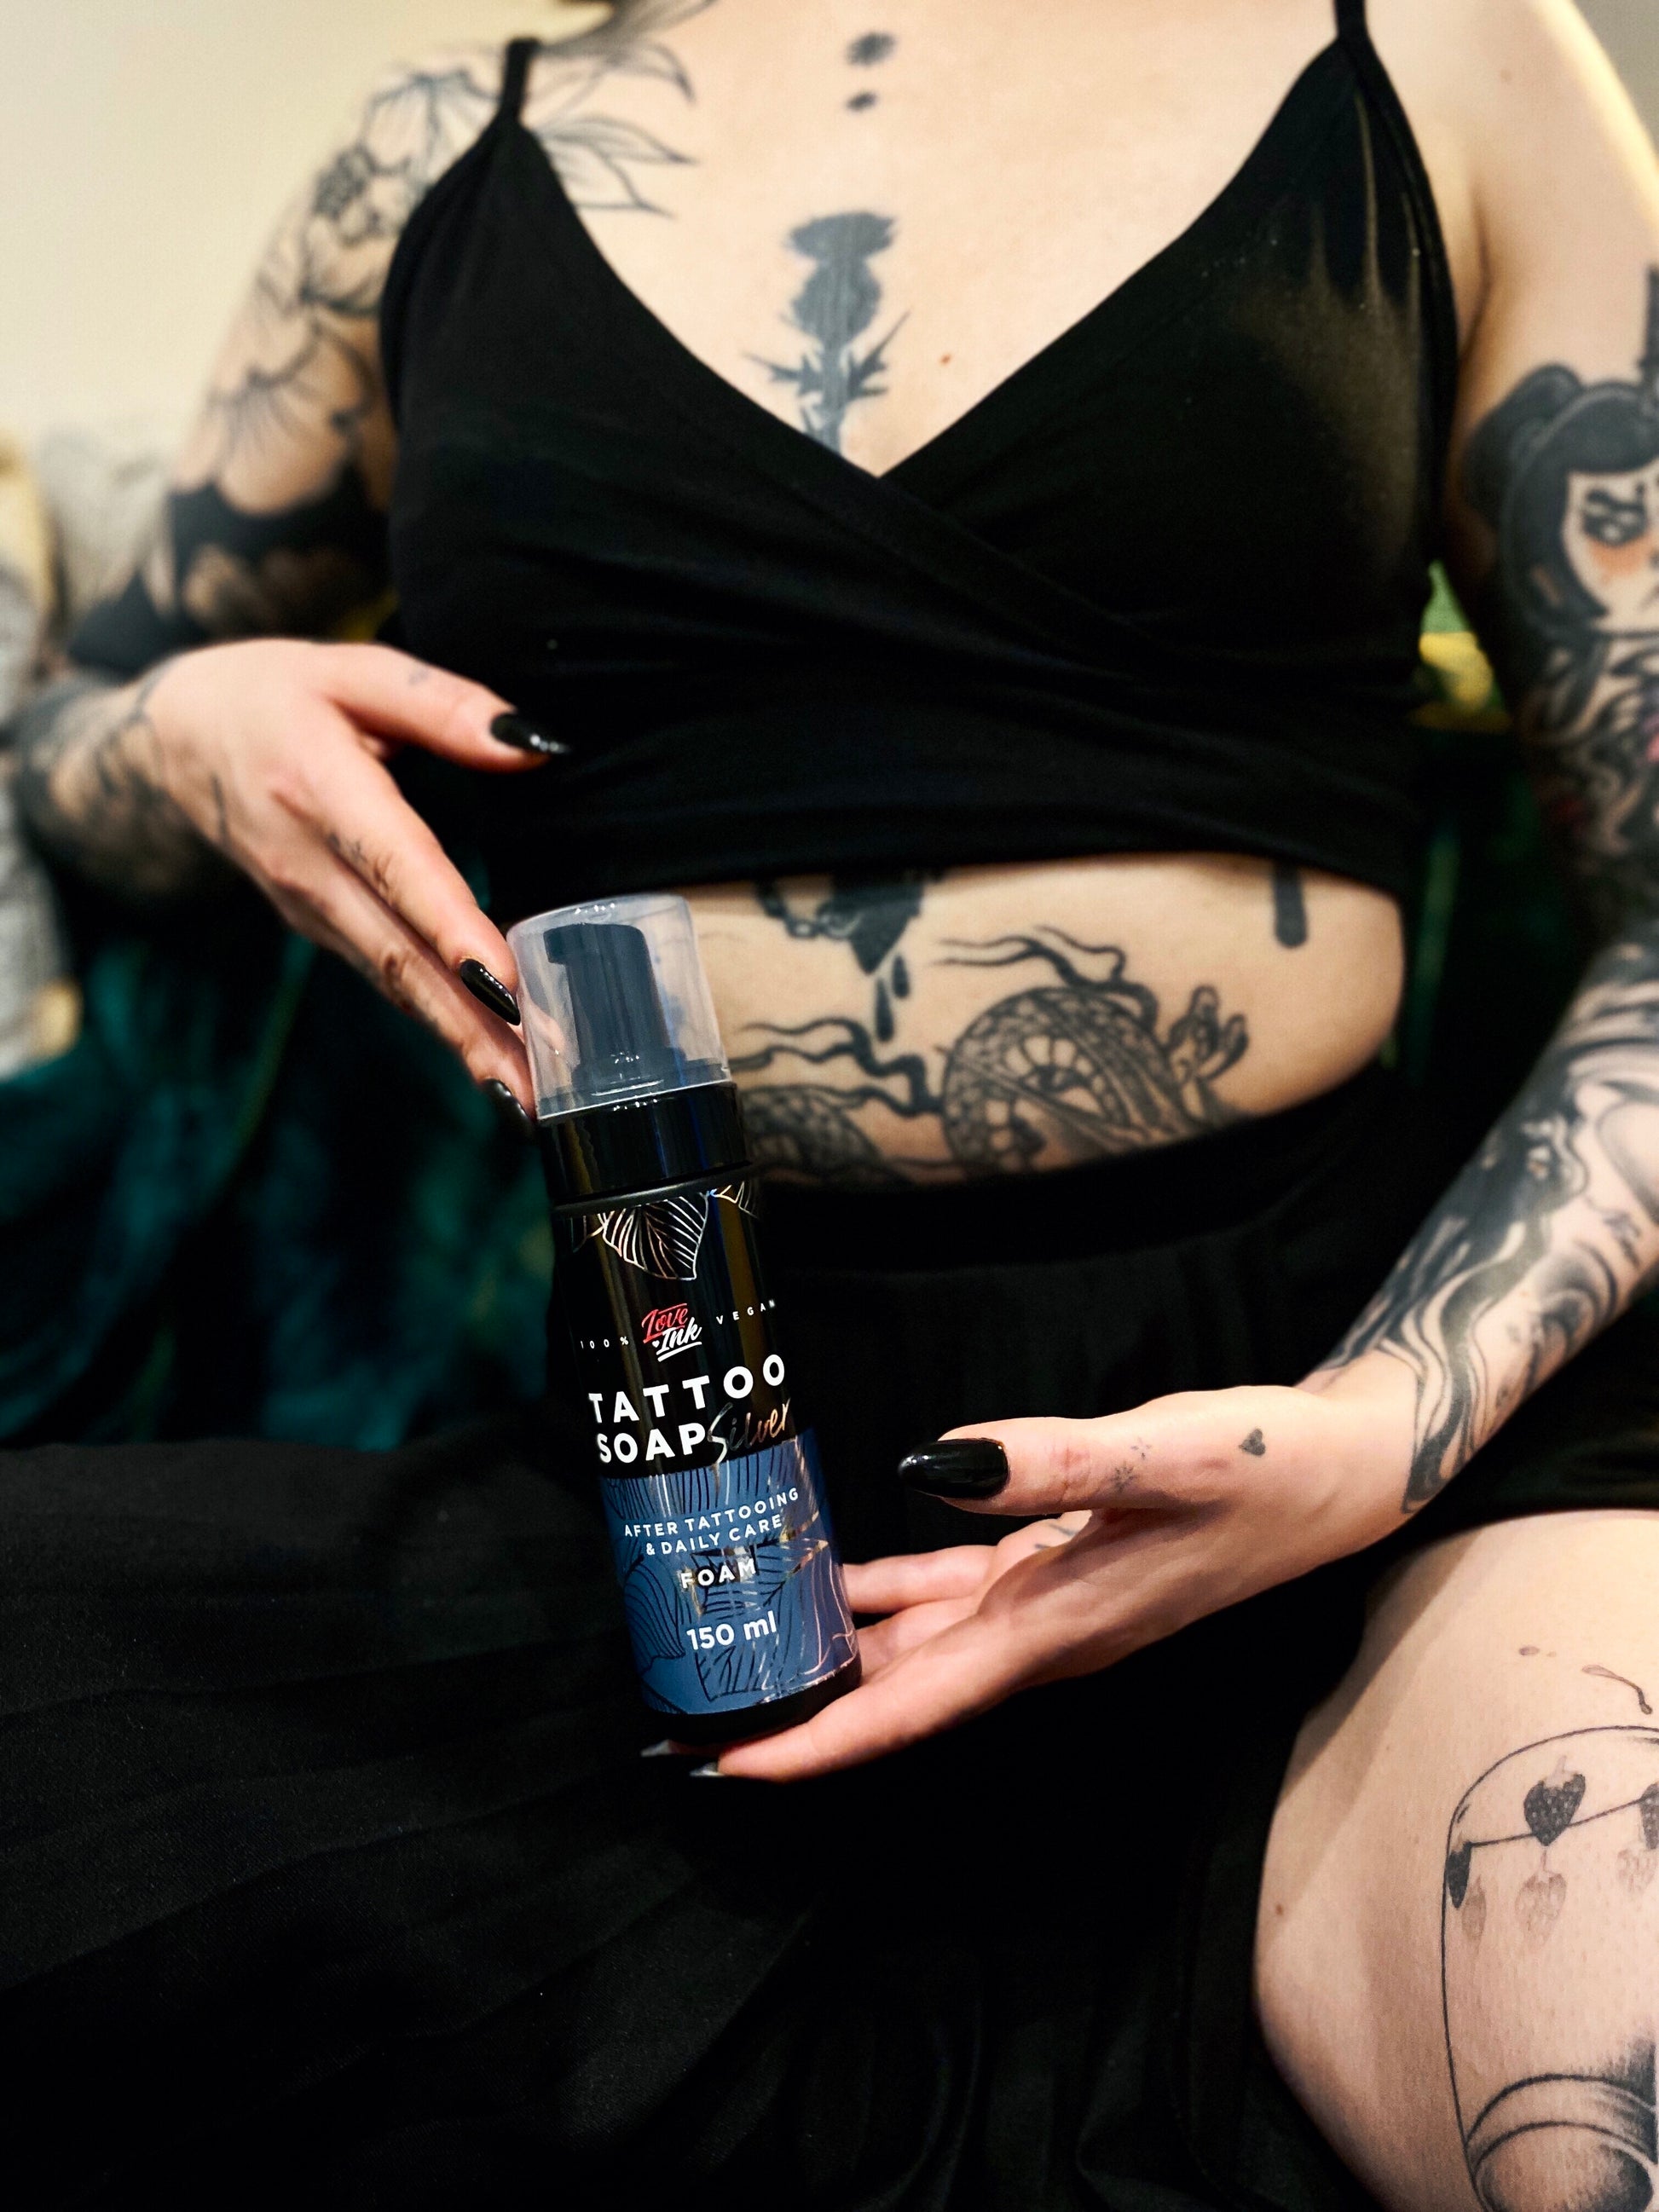 Woman with tattoos holding LoveInk's Tattoo Soap Silver bottle, showcasing tattoos on her arms, stomach, and legs. The product is for tattoo care and comes in a 150ml bottle.